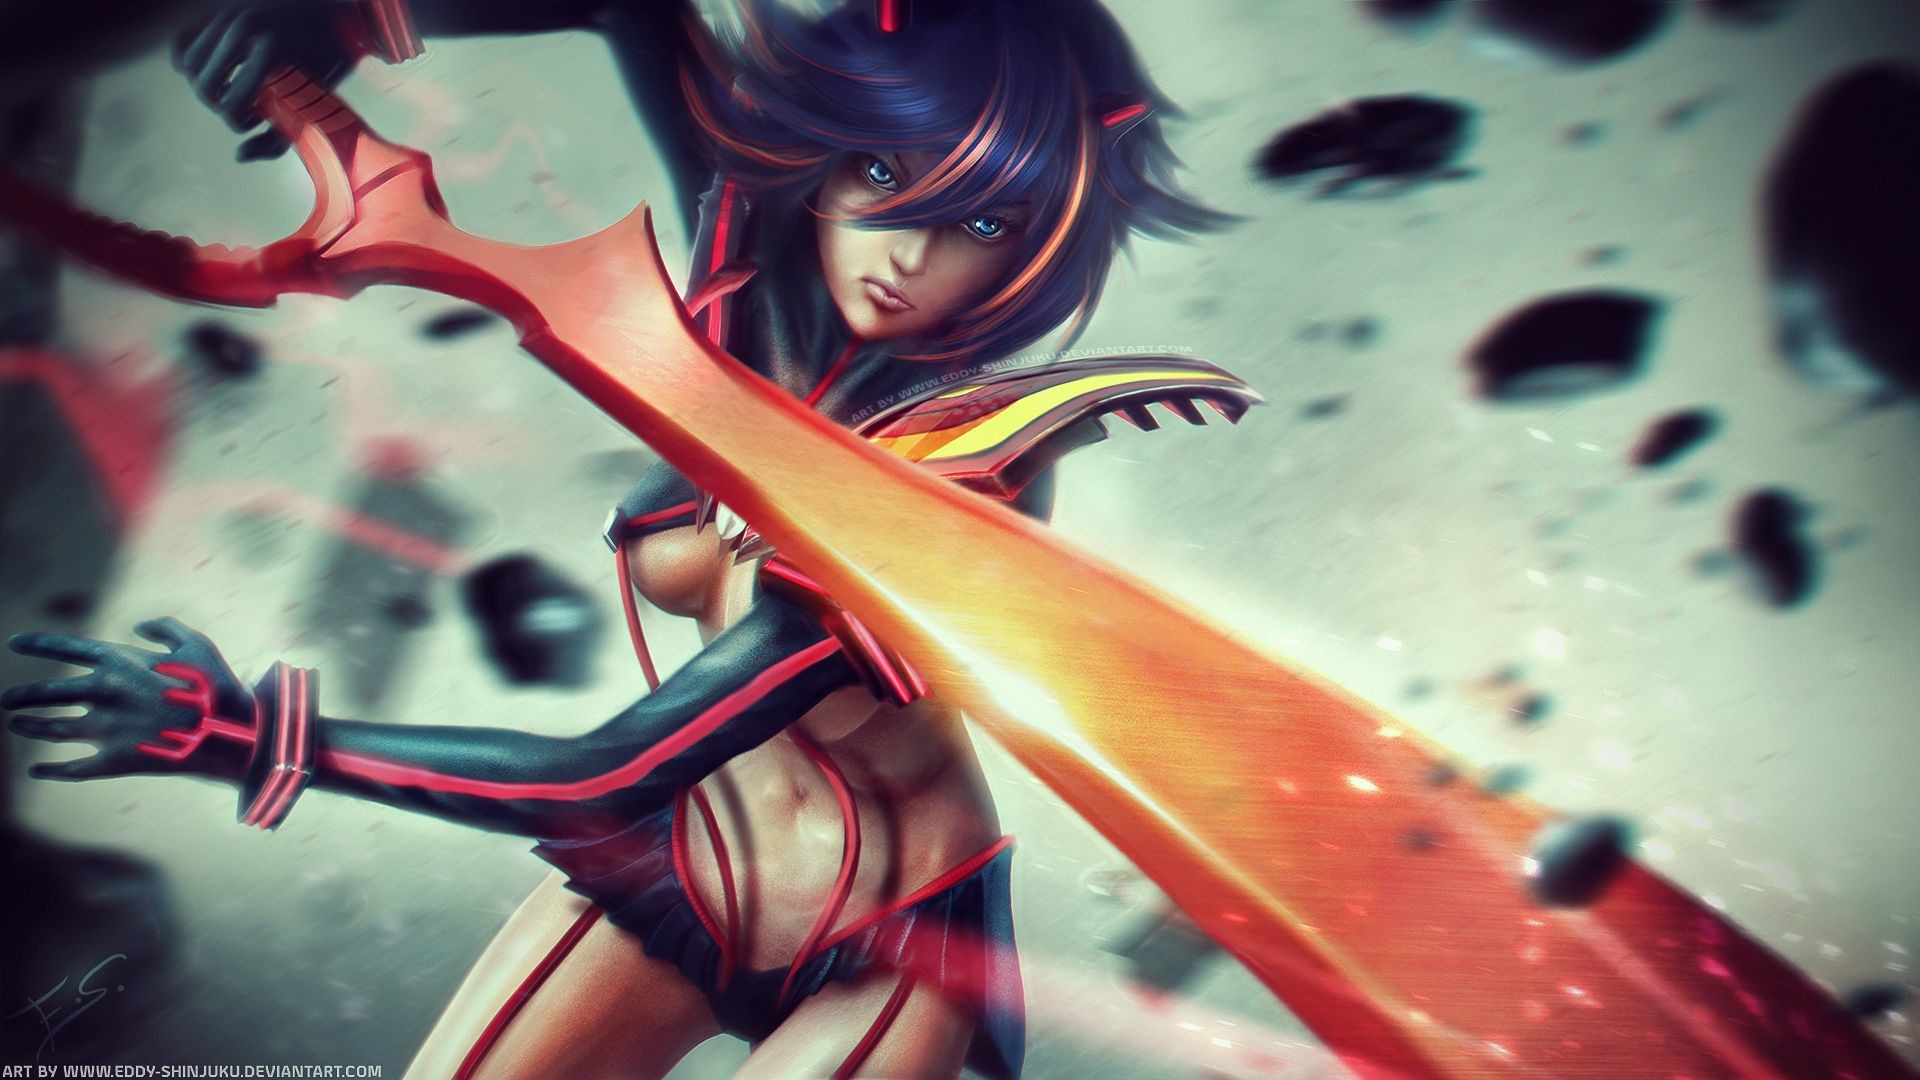 1920x1080 View, download, comment, and rate this  Kill La Kill Wallpaper -  Wallpaper Abyss